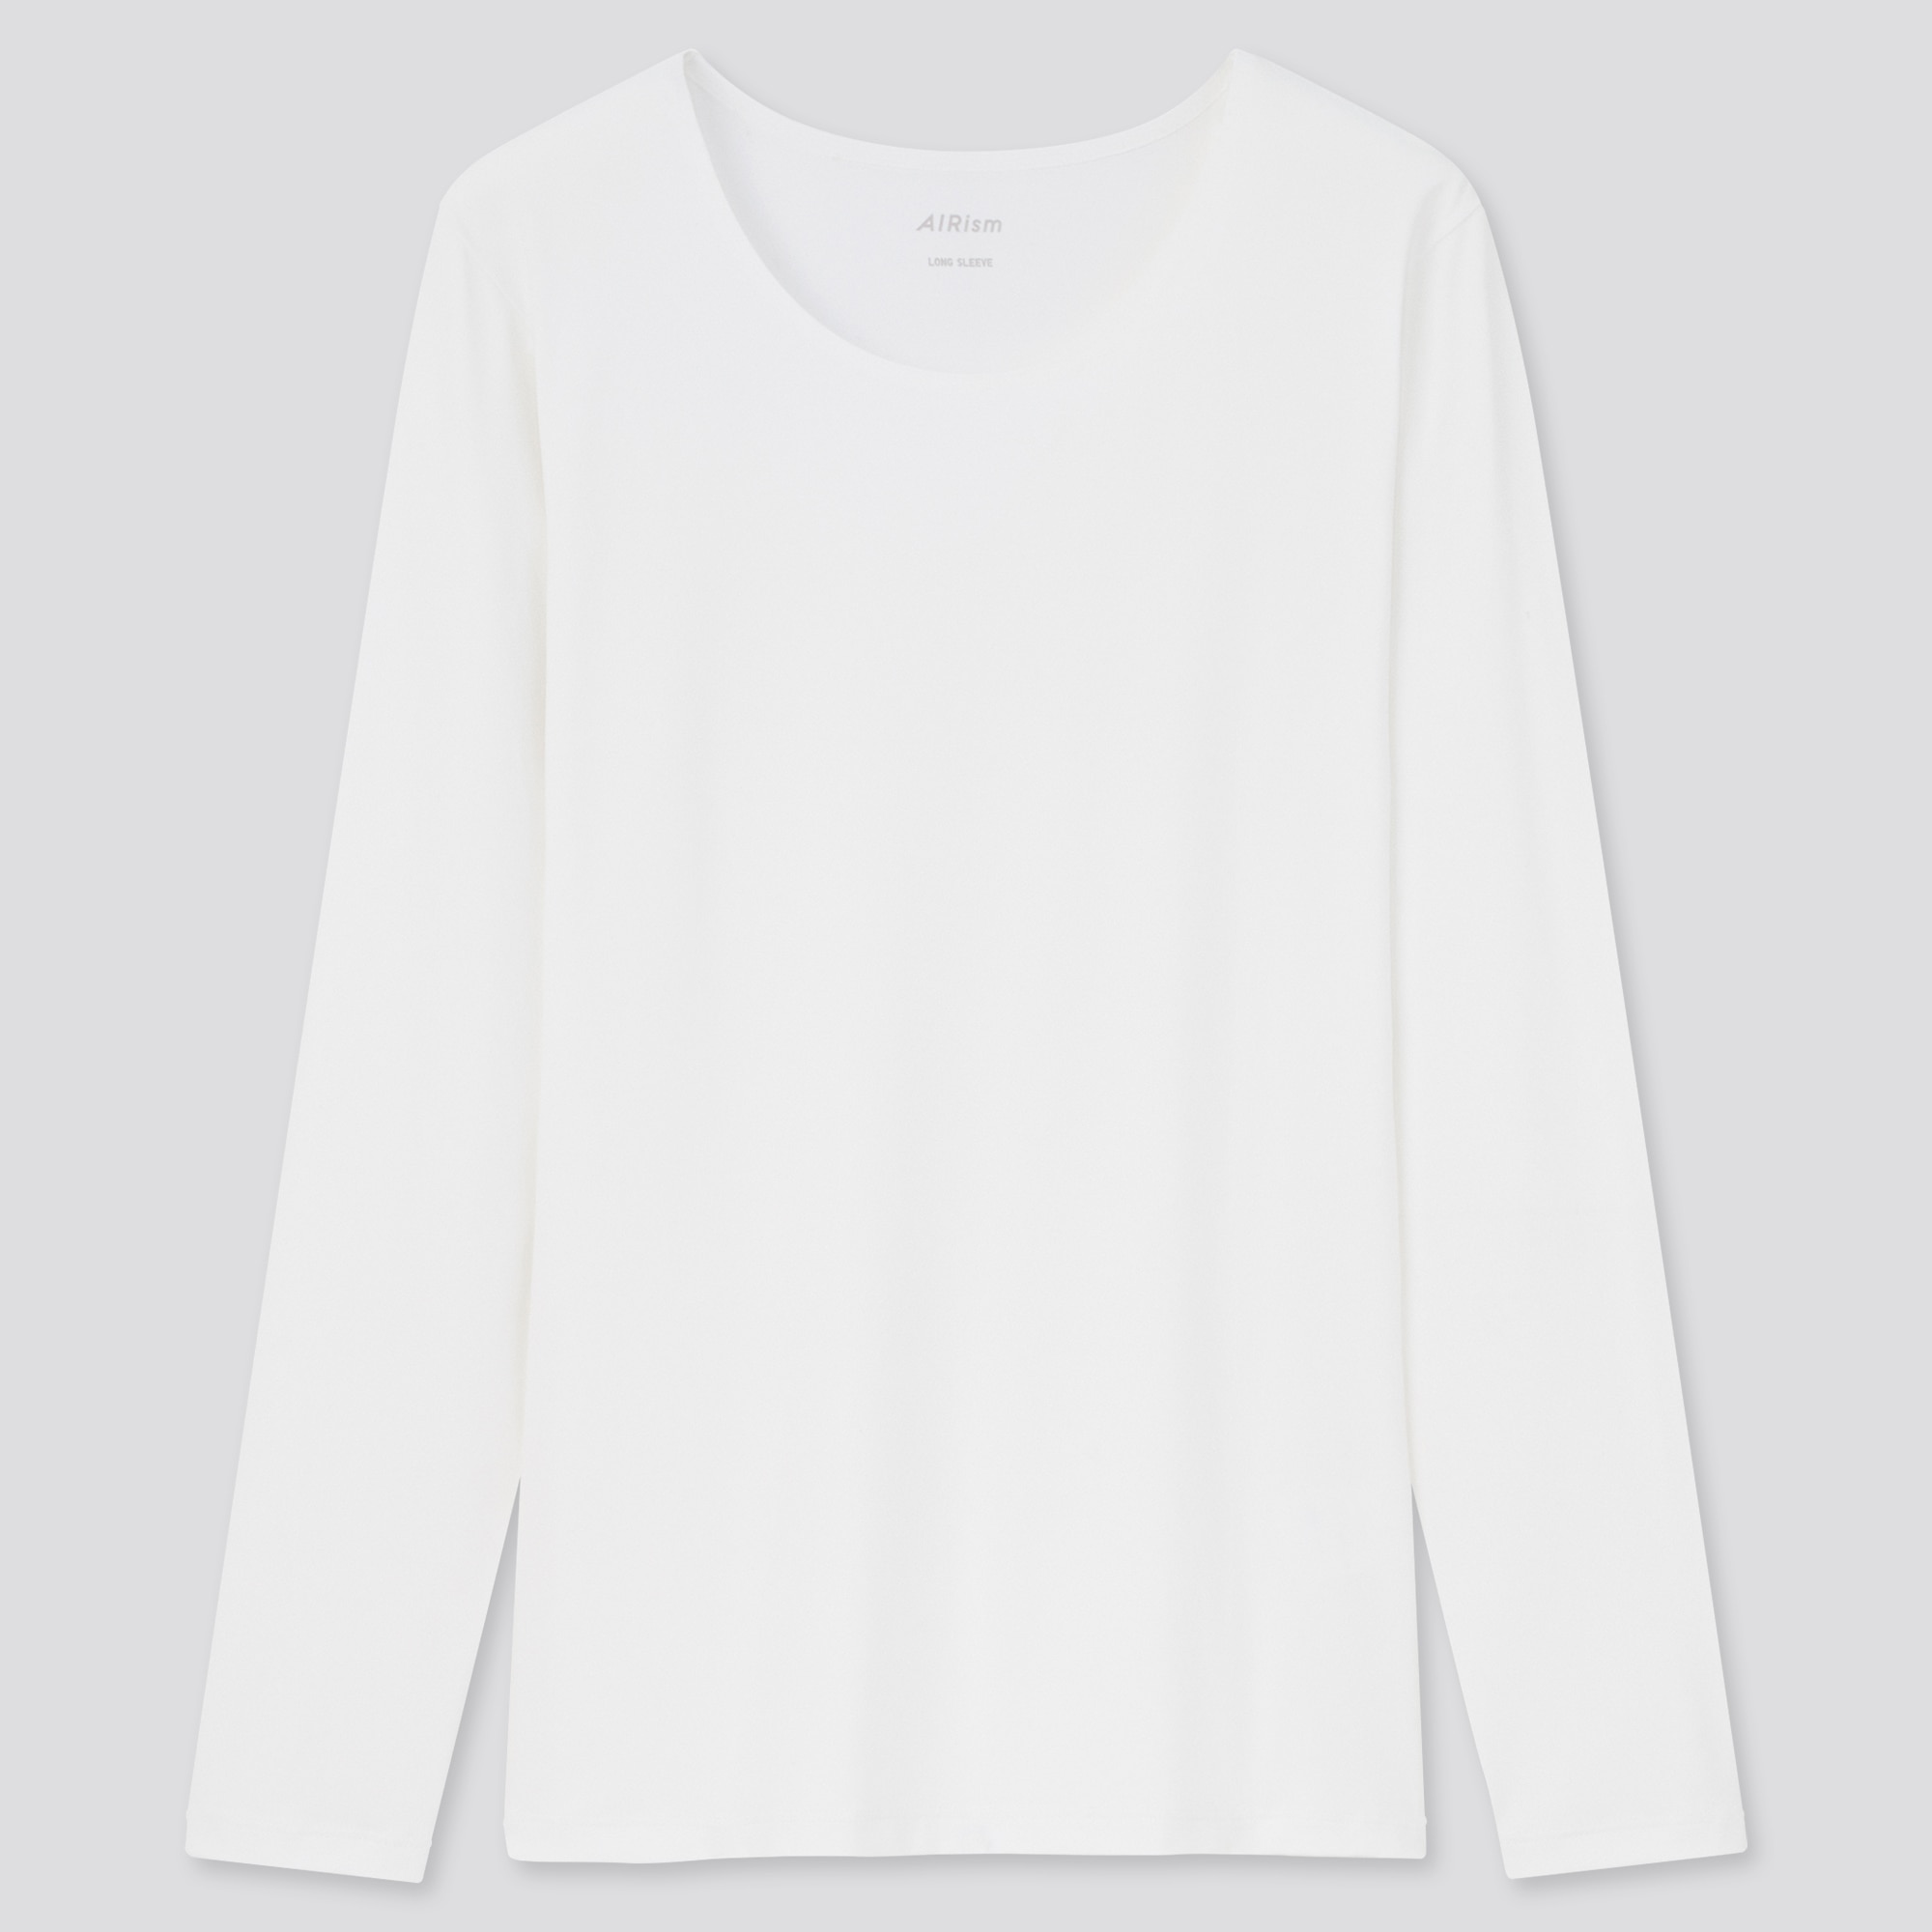 Buy > long sleeve t shirts uv protection > in stock